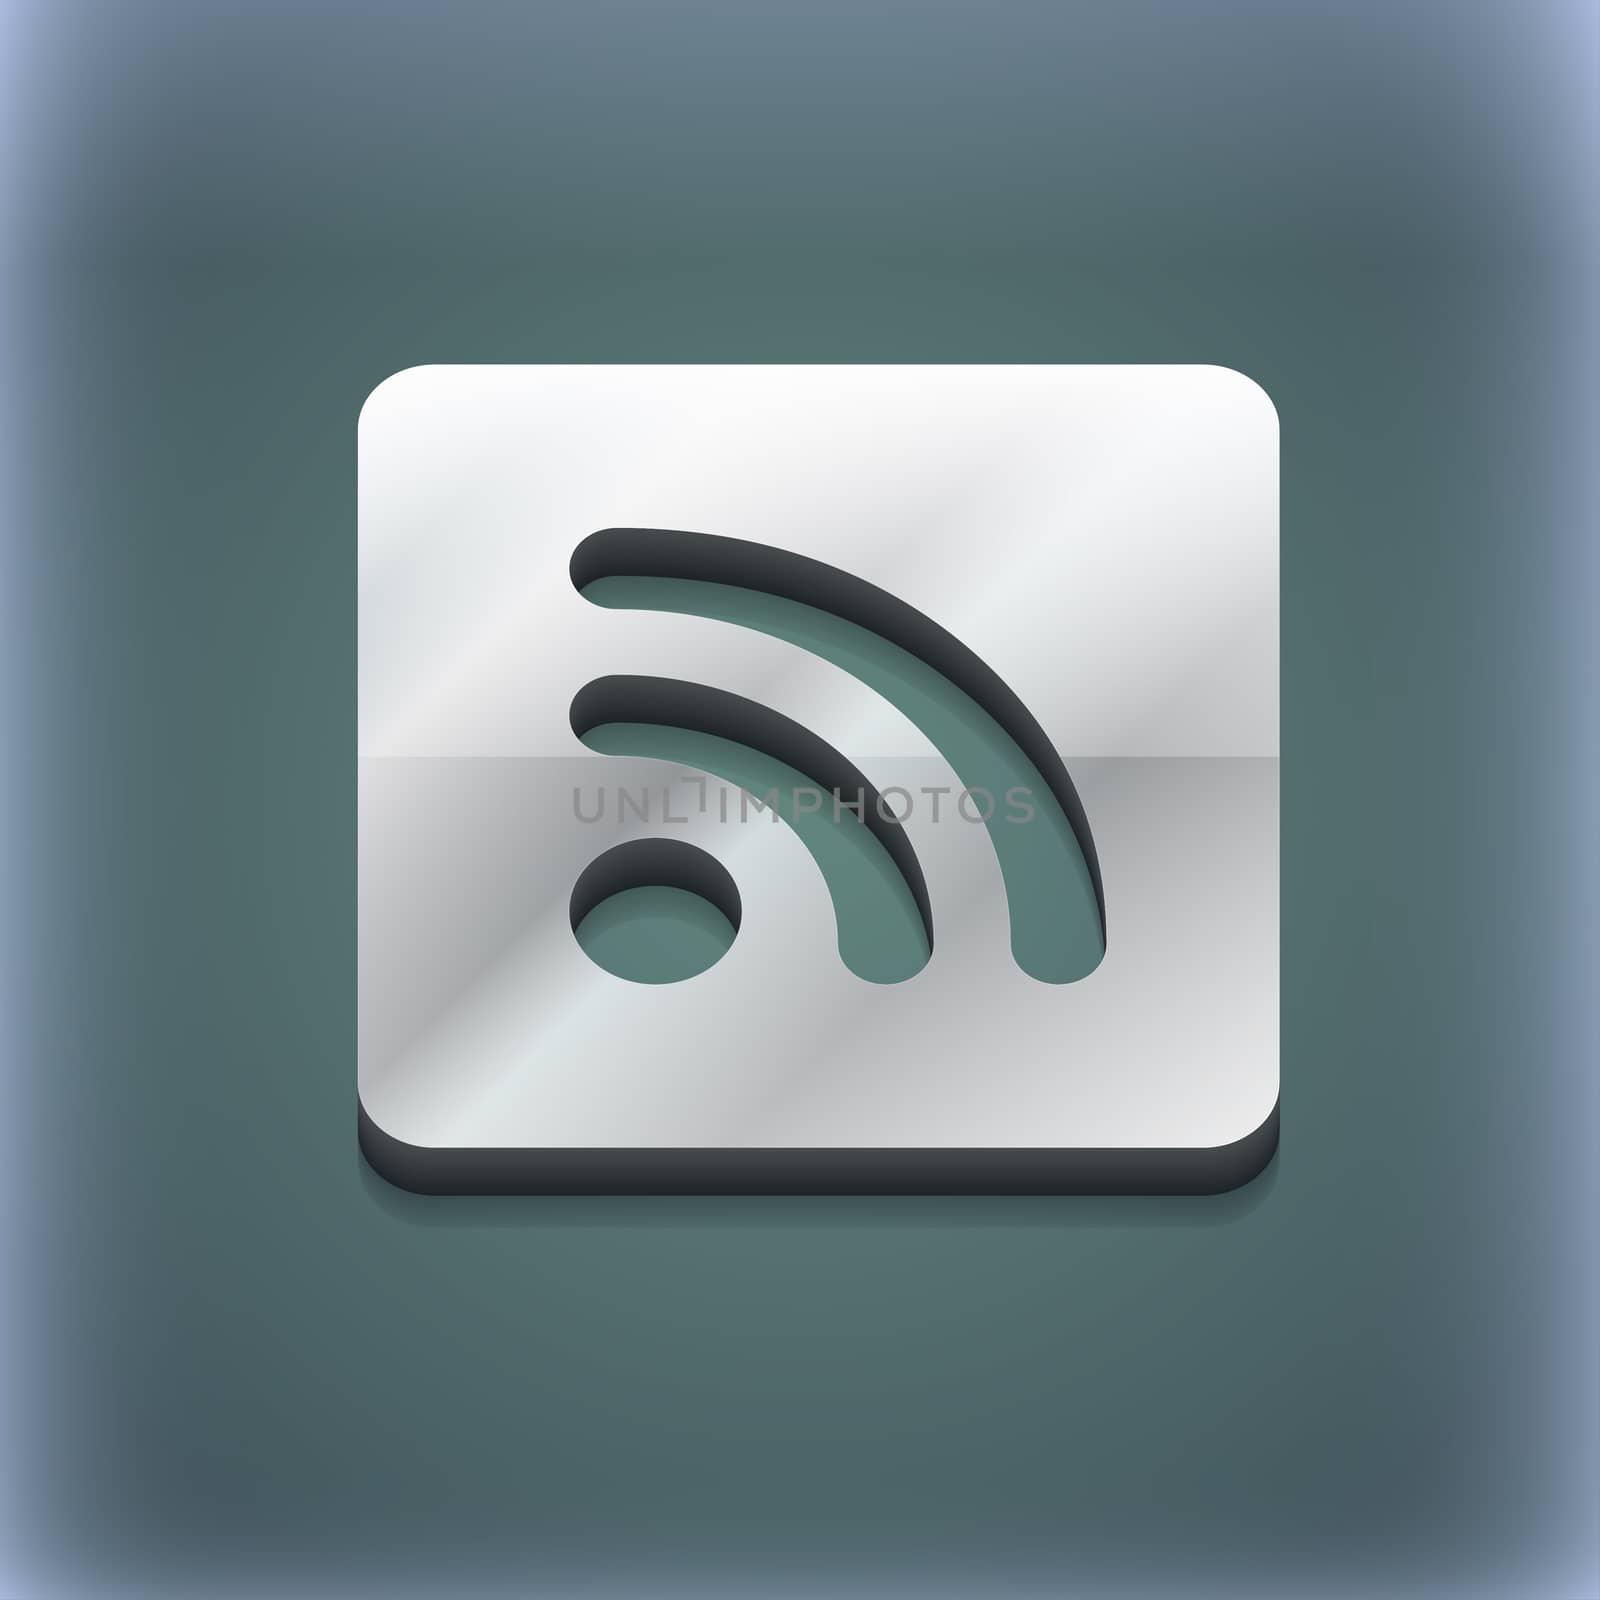 RSS feed icon symbol. 3D style. Trendy, modern design with space for your text illustration. Raster version